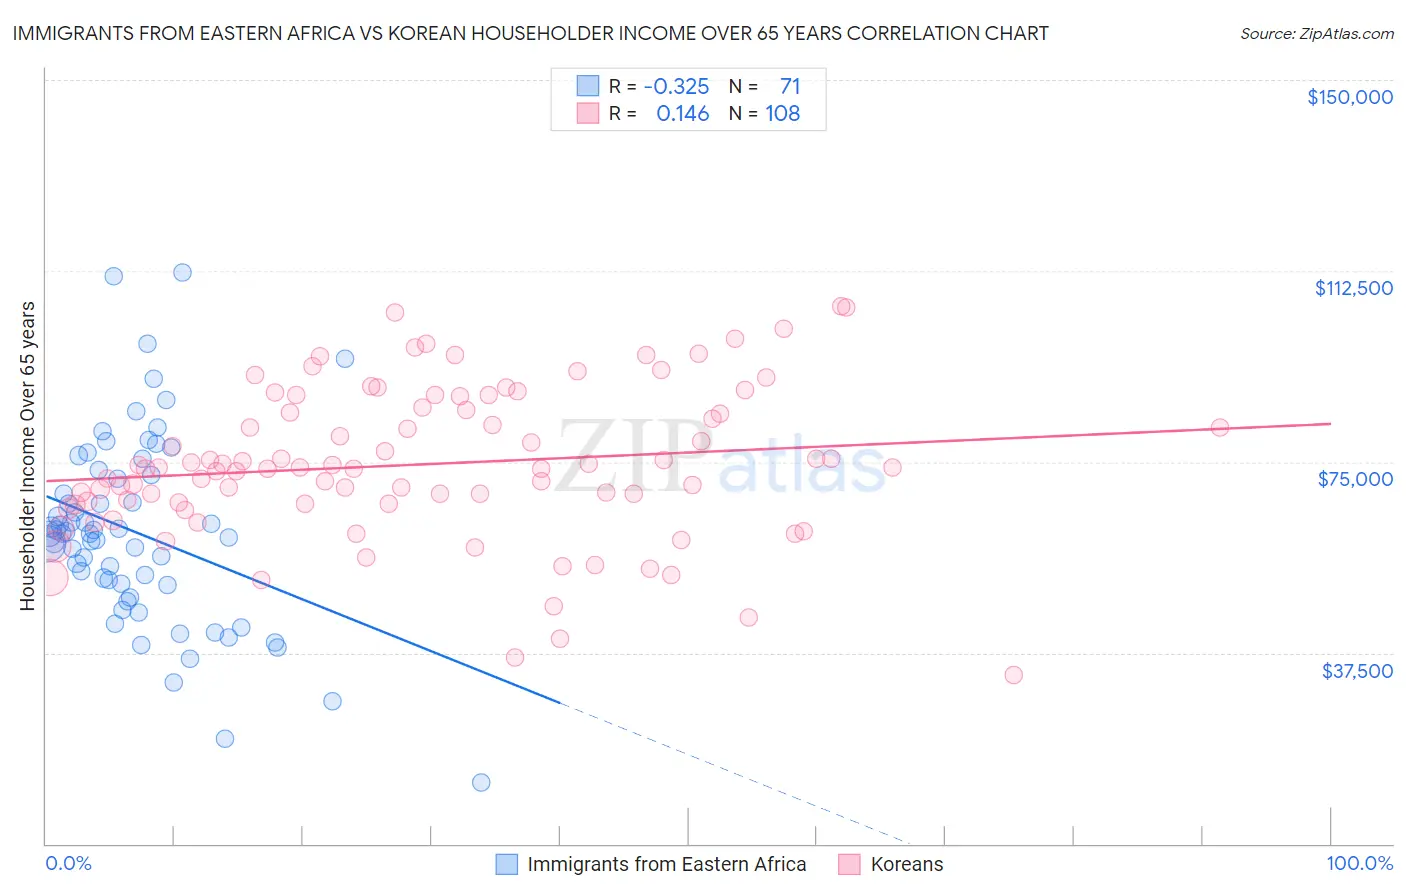 Immigrants from Eastern Africa vs Korean Householder Income Over 65 years